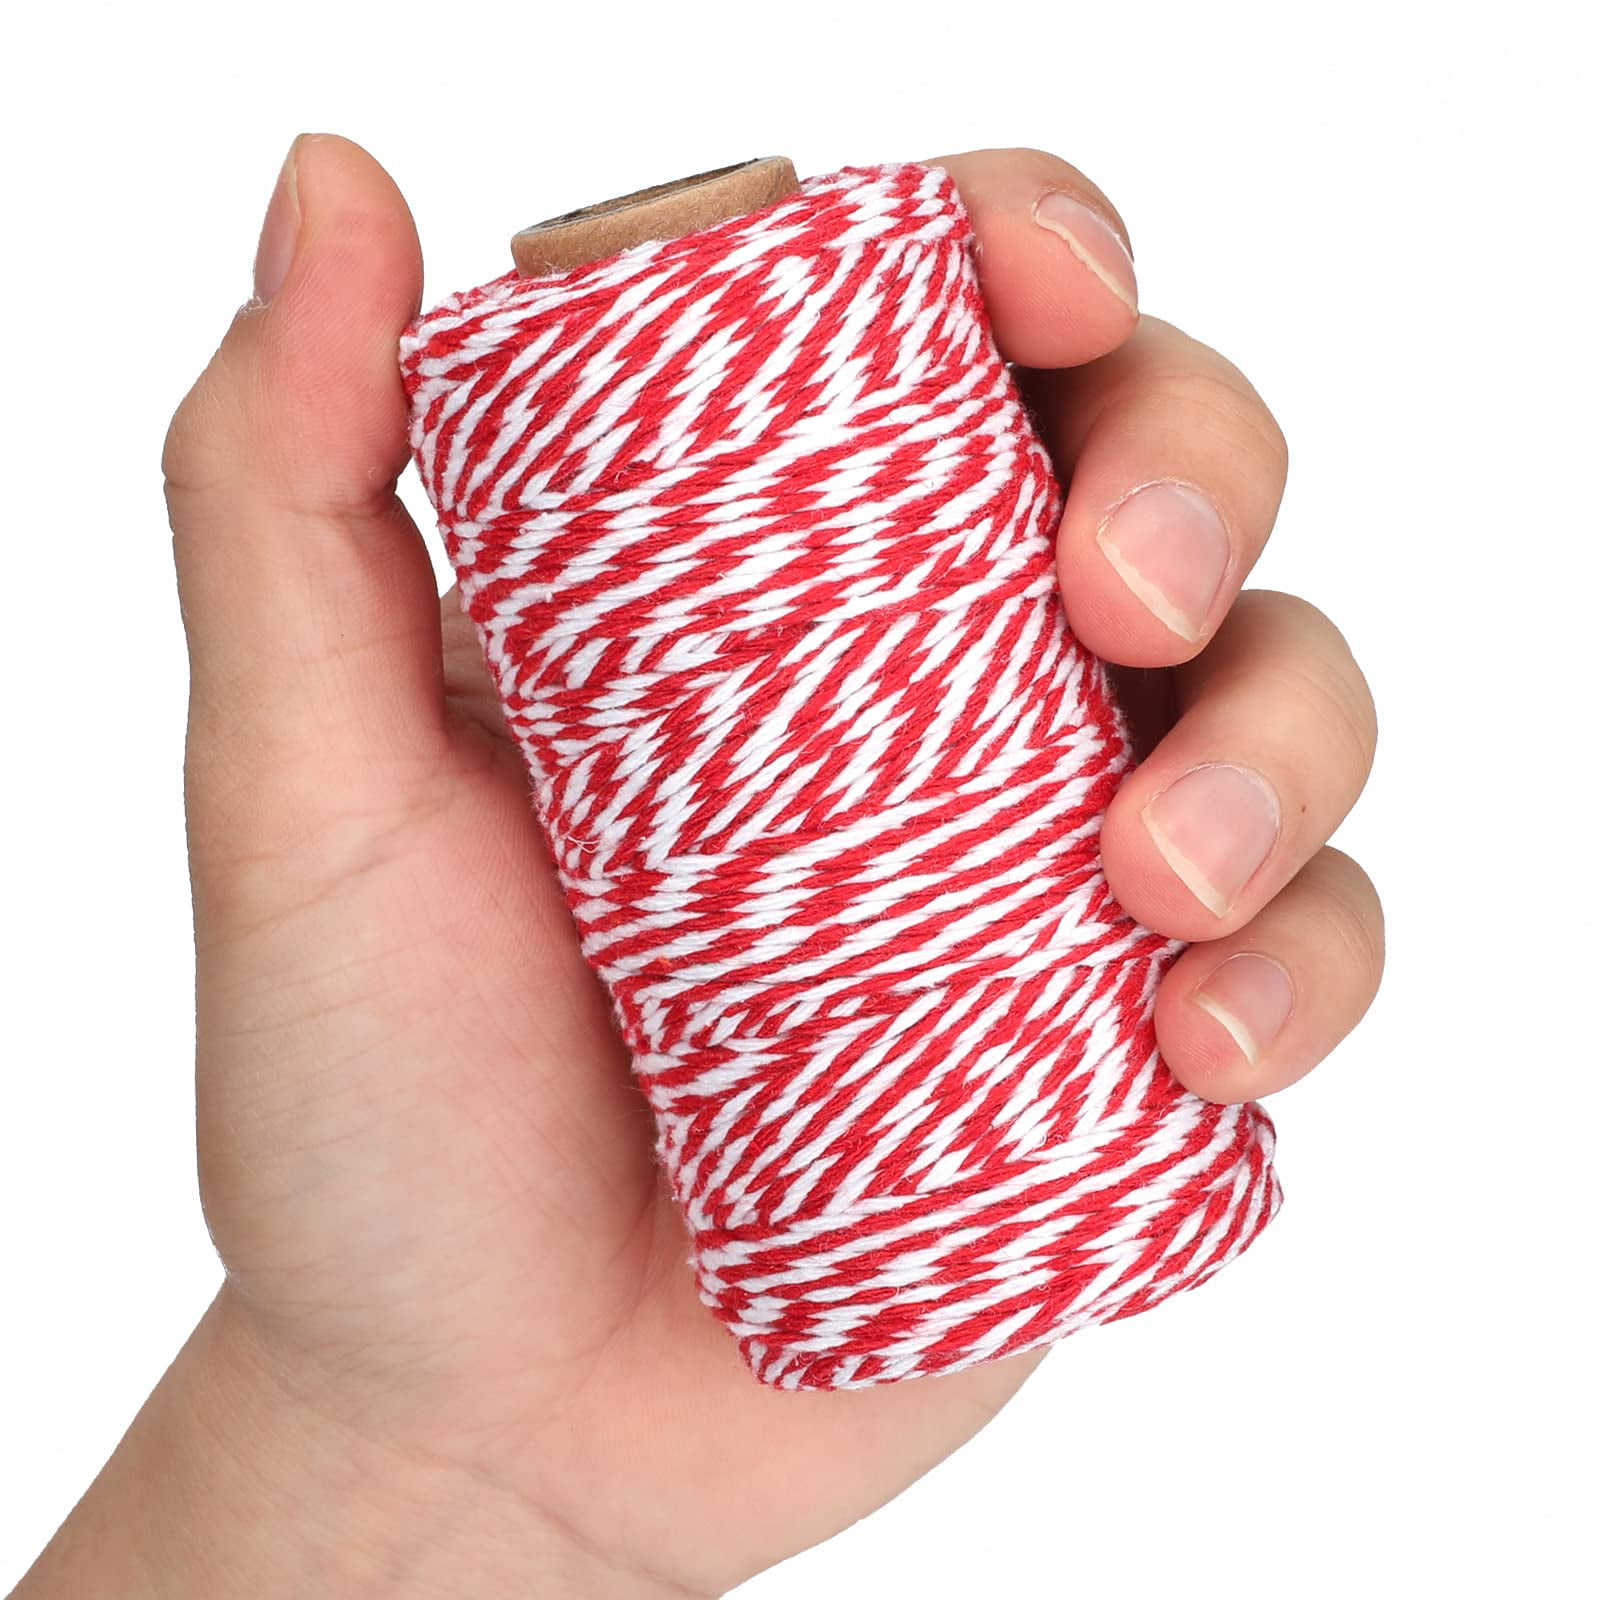 KINGLAKE 656 Feet Red and White Twine,Cotton Baker's Twine Cotton Cord Crafts Gift Twine String for Christmas Holiday